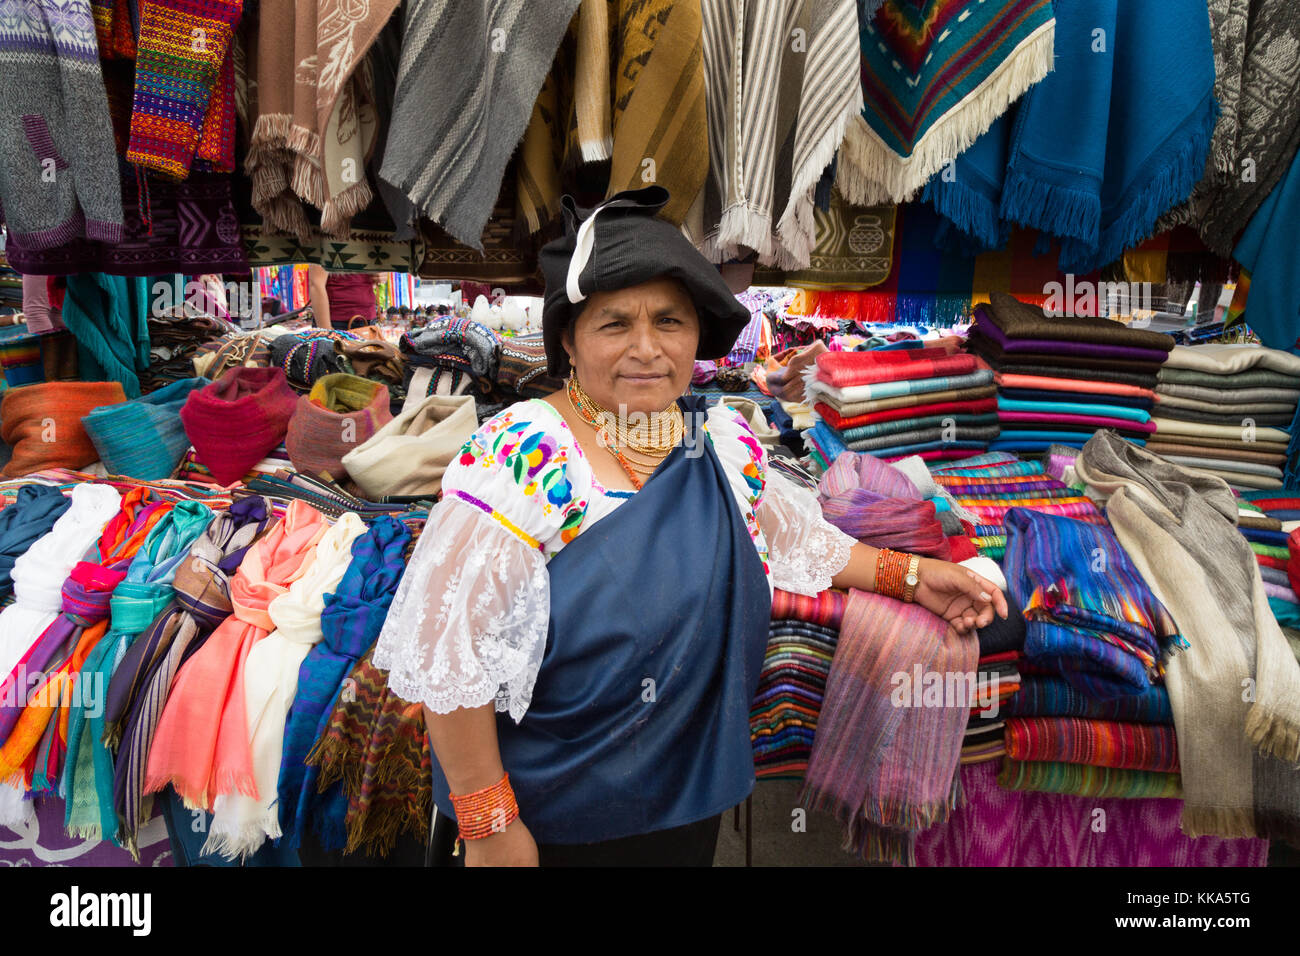 Otavalo market Woman in traditional costume of the indigenous people selling clothes from her stall, Otavalo Market, Ecuador, South America Stock Photo